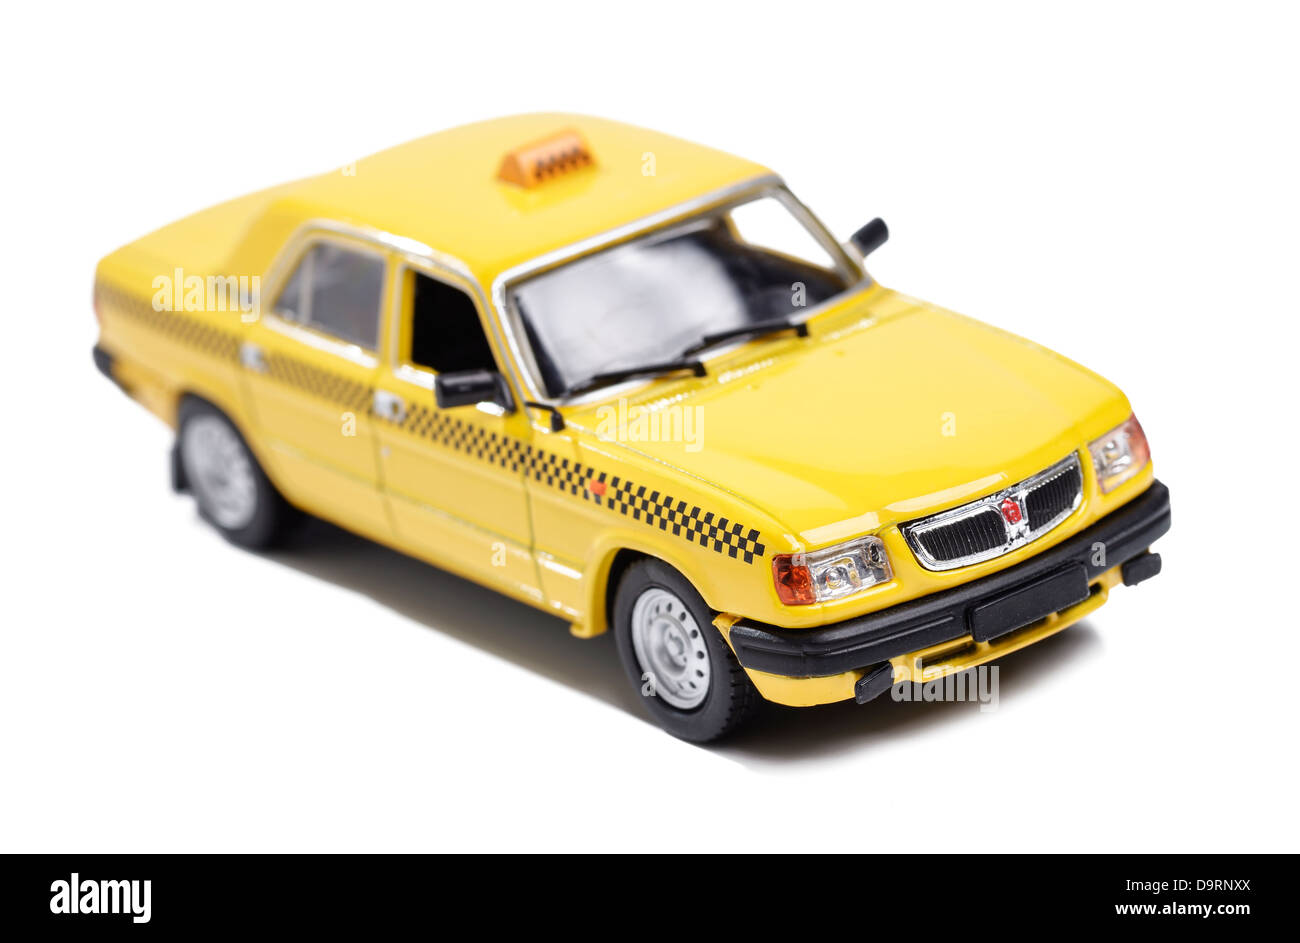 Toy yellow taxi cab Stock Photo